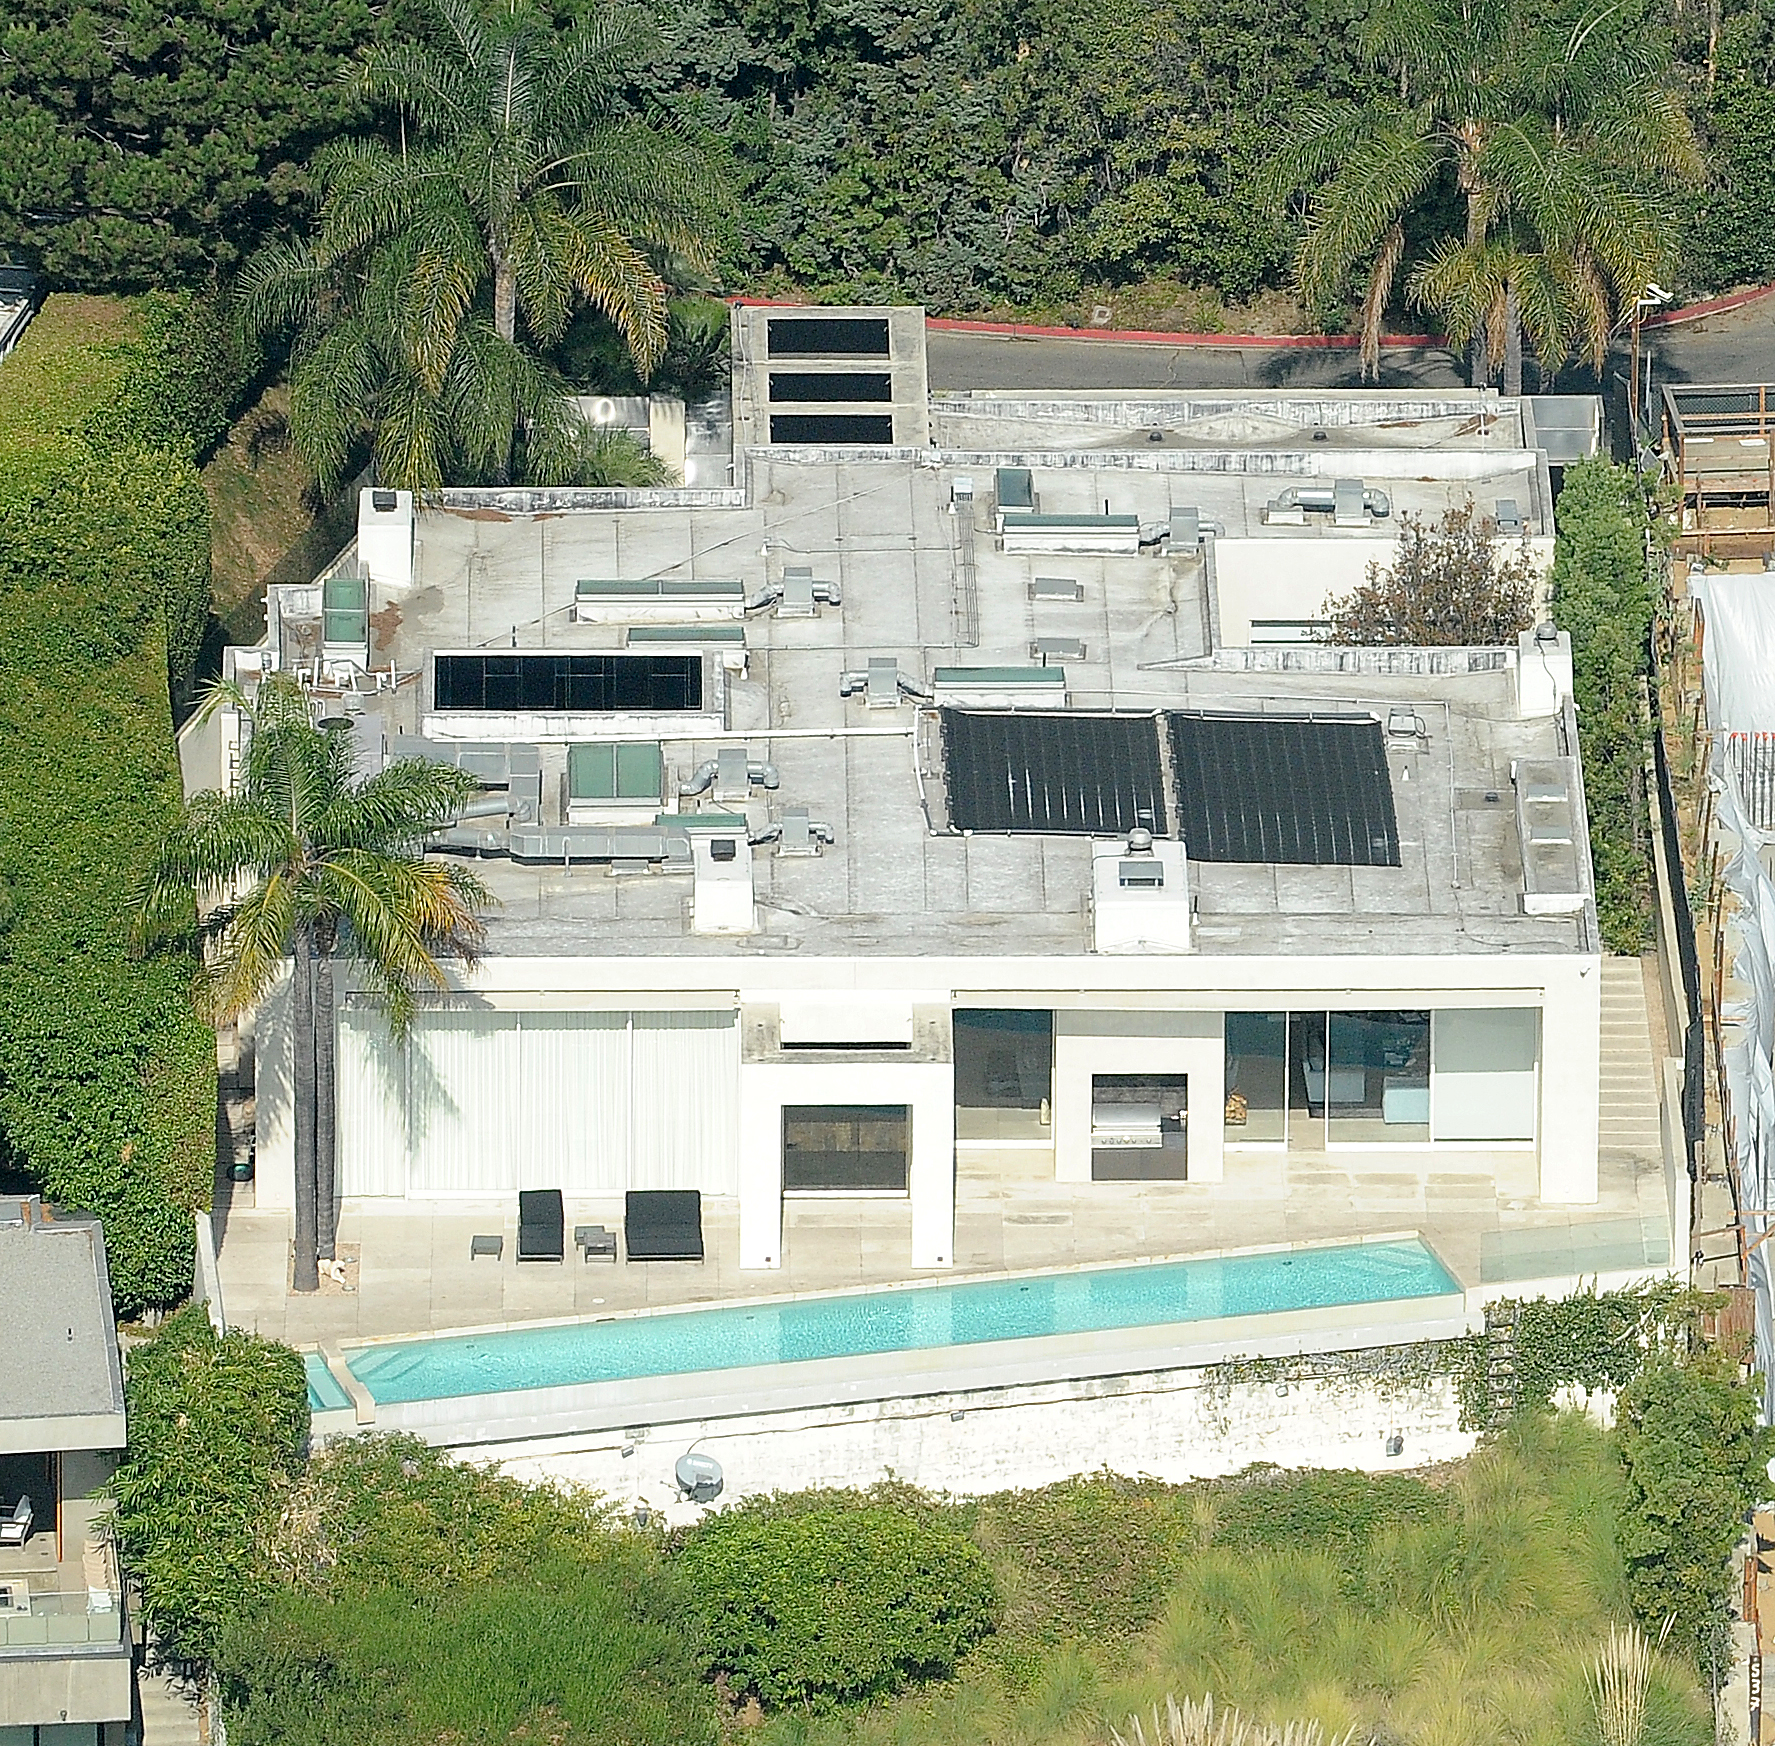 Keanu Reeves' House Is LowKey and EcoFriendly See Photos!